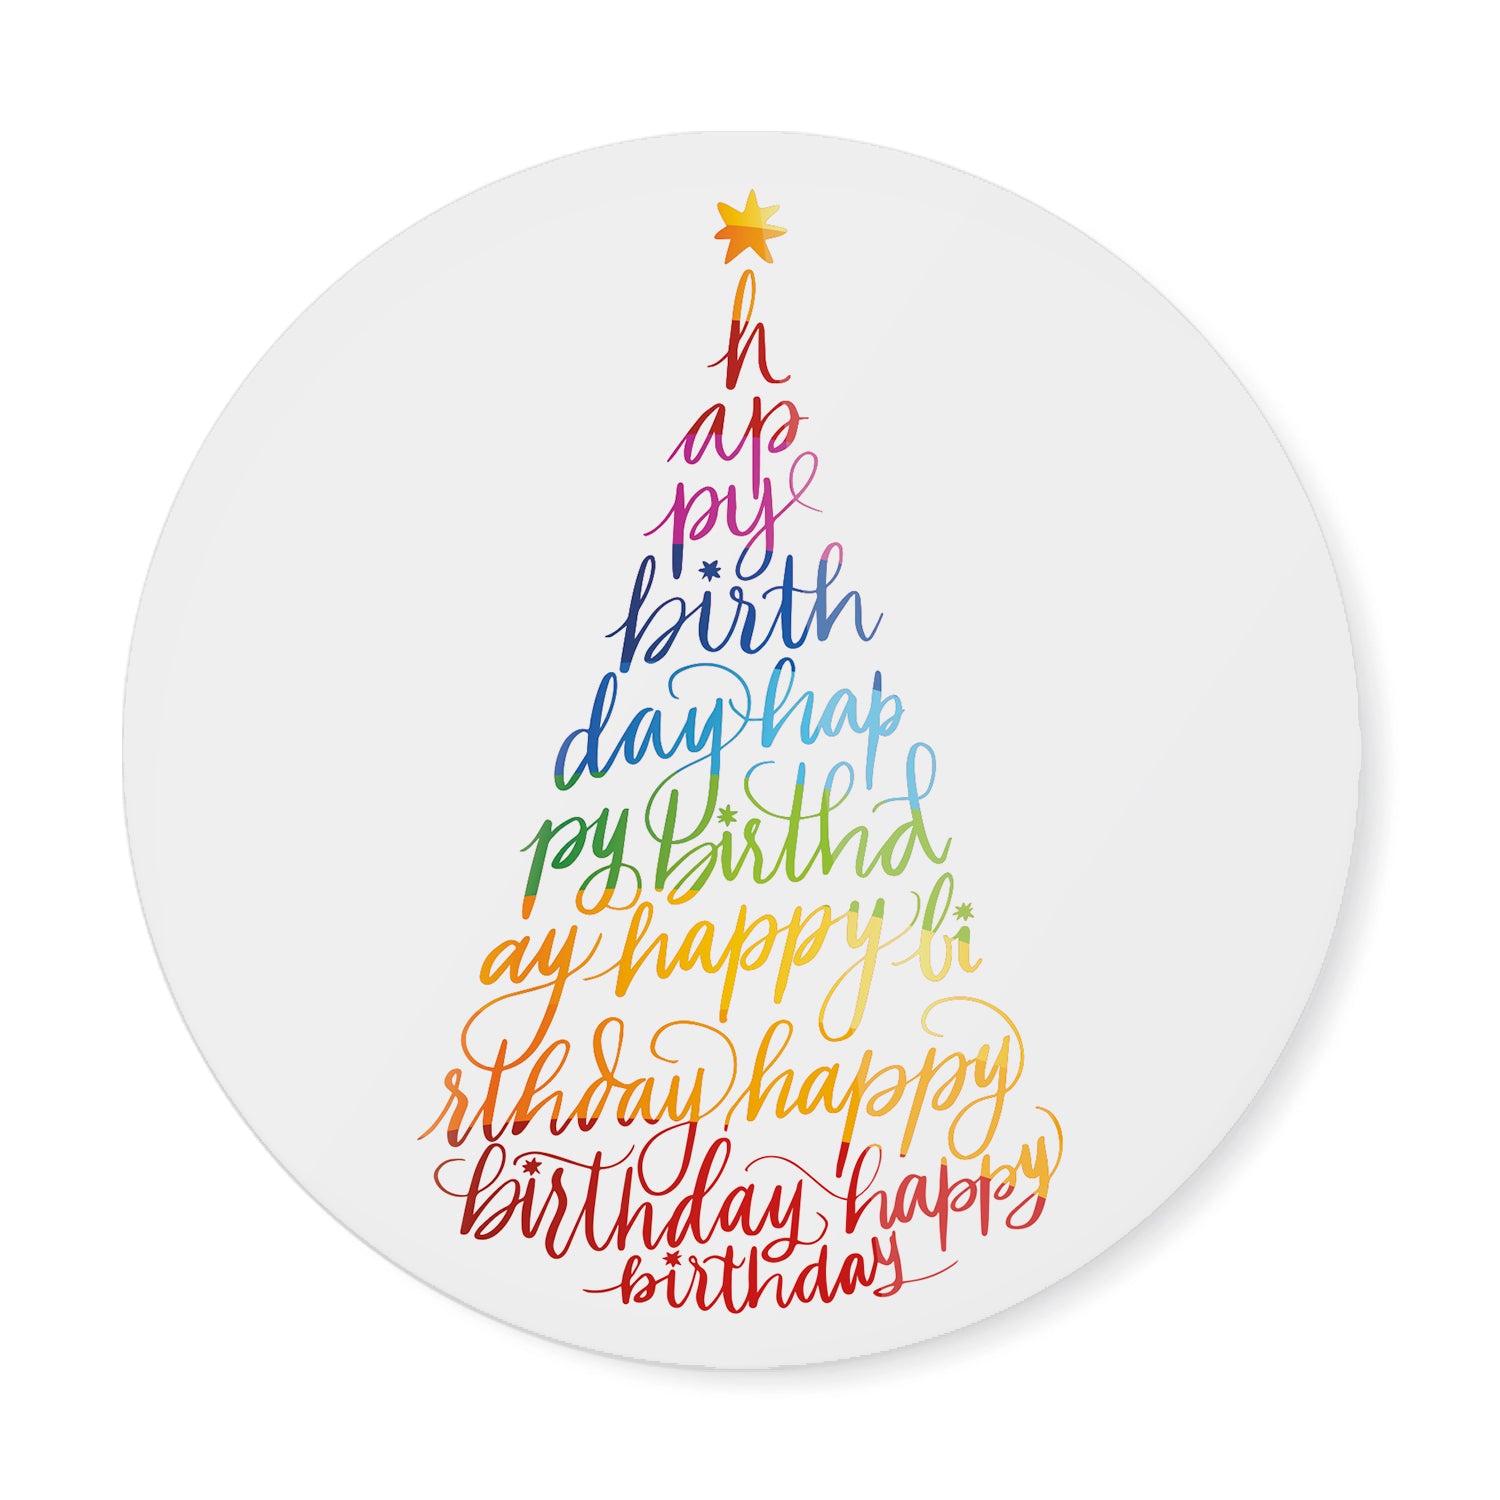 Thumbnail isolated sticker image: Happy Birthday Party hat, abstract calligraphy